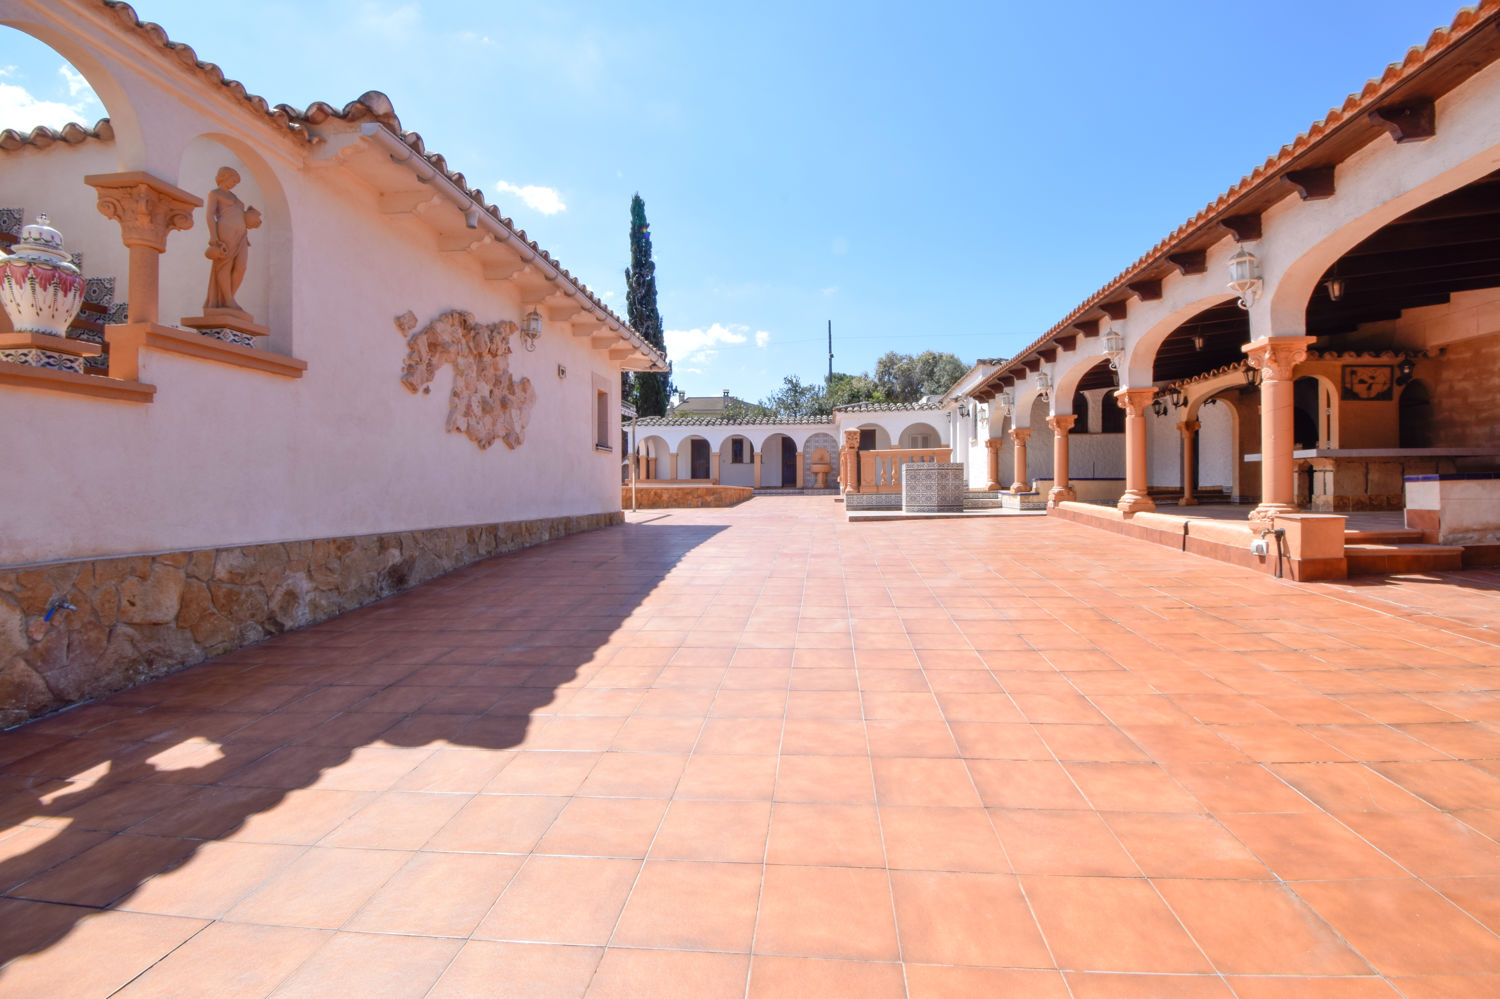 For rent: Large finca with pool in Las Palmeras